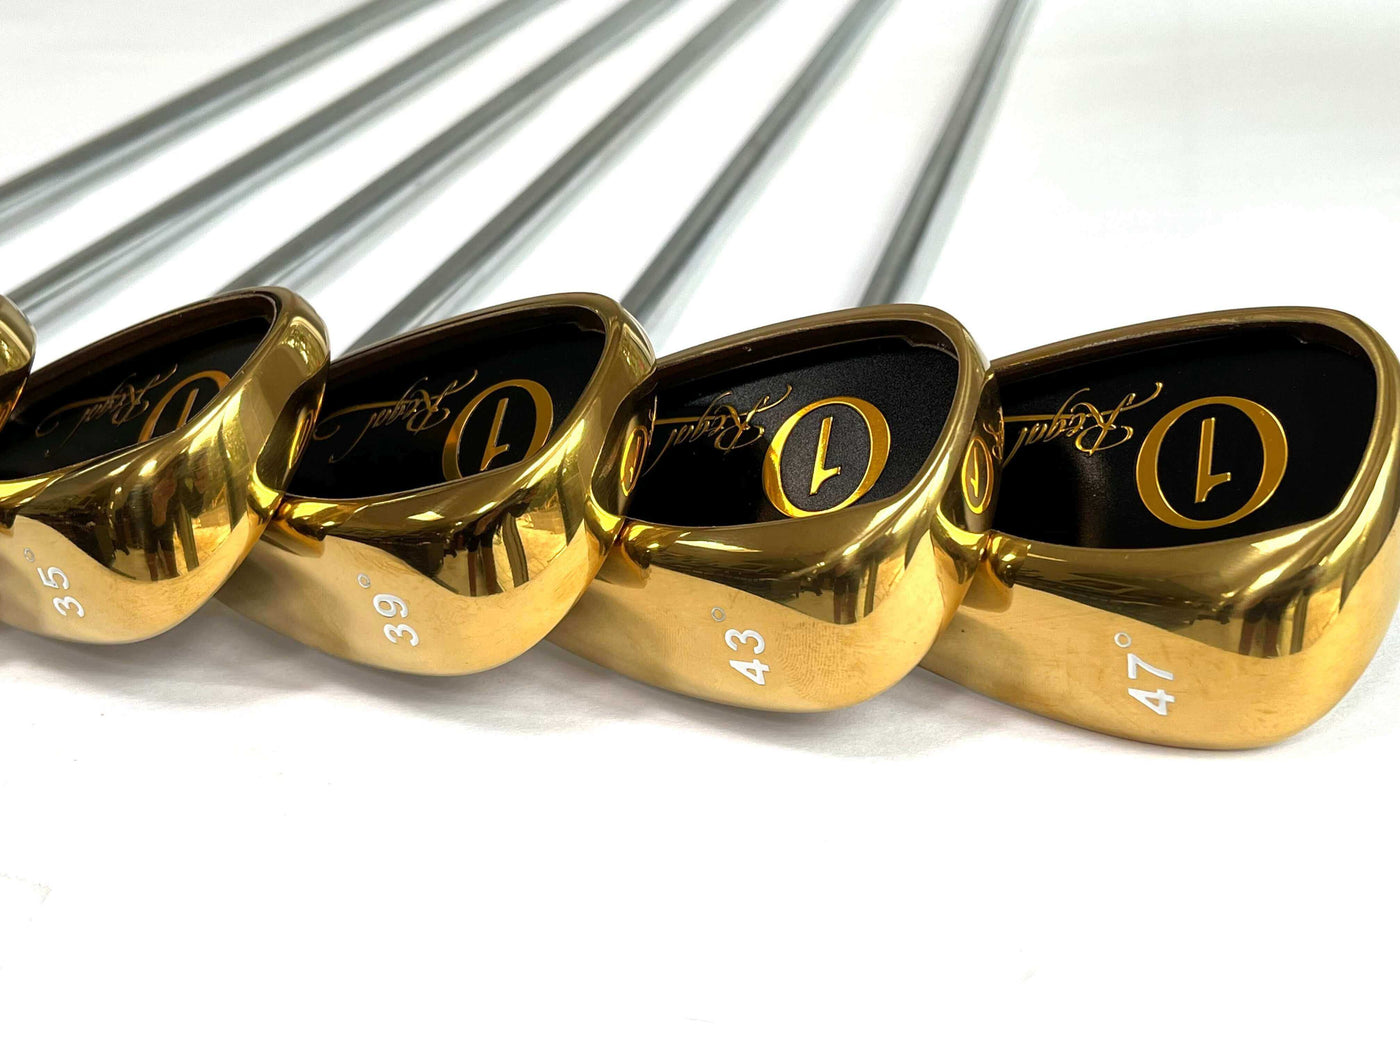 Used/Demo Regal Woods and Irons Combo Sets - NOW 30% OFF!